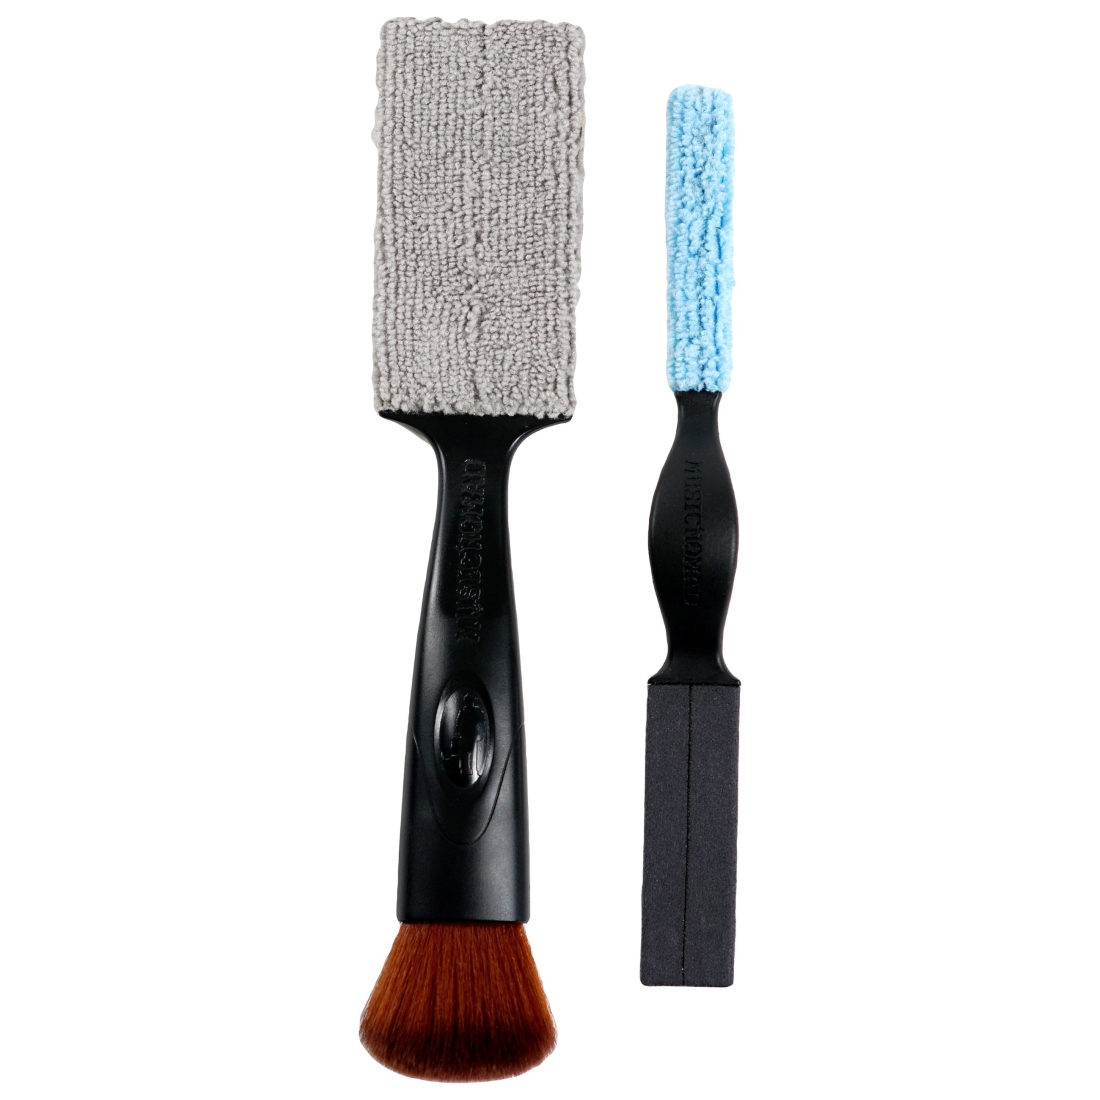 The Nomad Tool Set 2-Piece All-in-one Cleaning Set